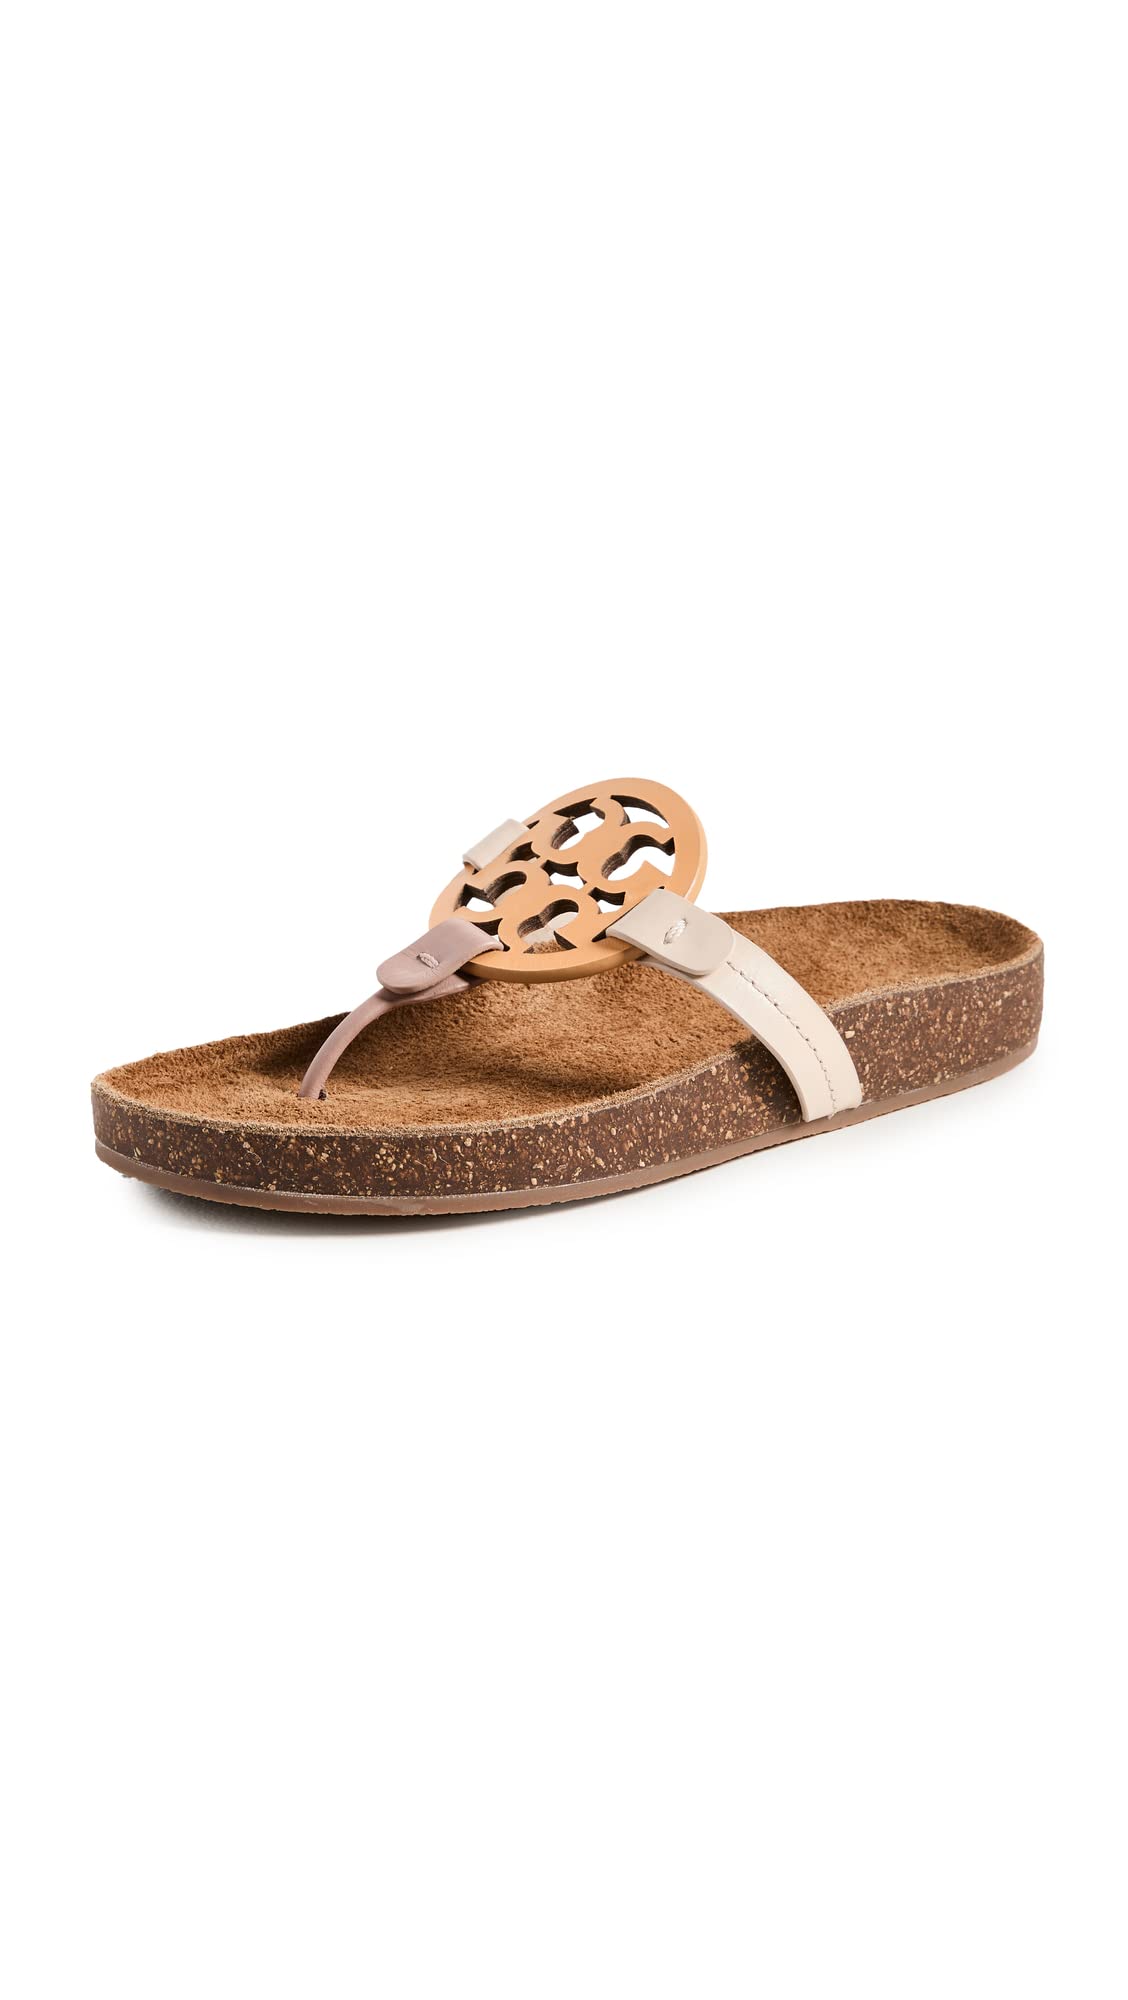 Tory Burch Outlet: Miller leather flip flops - Black | Tory Burch flat  sandals 136593 online at GIGLIO.COM